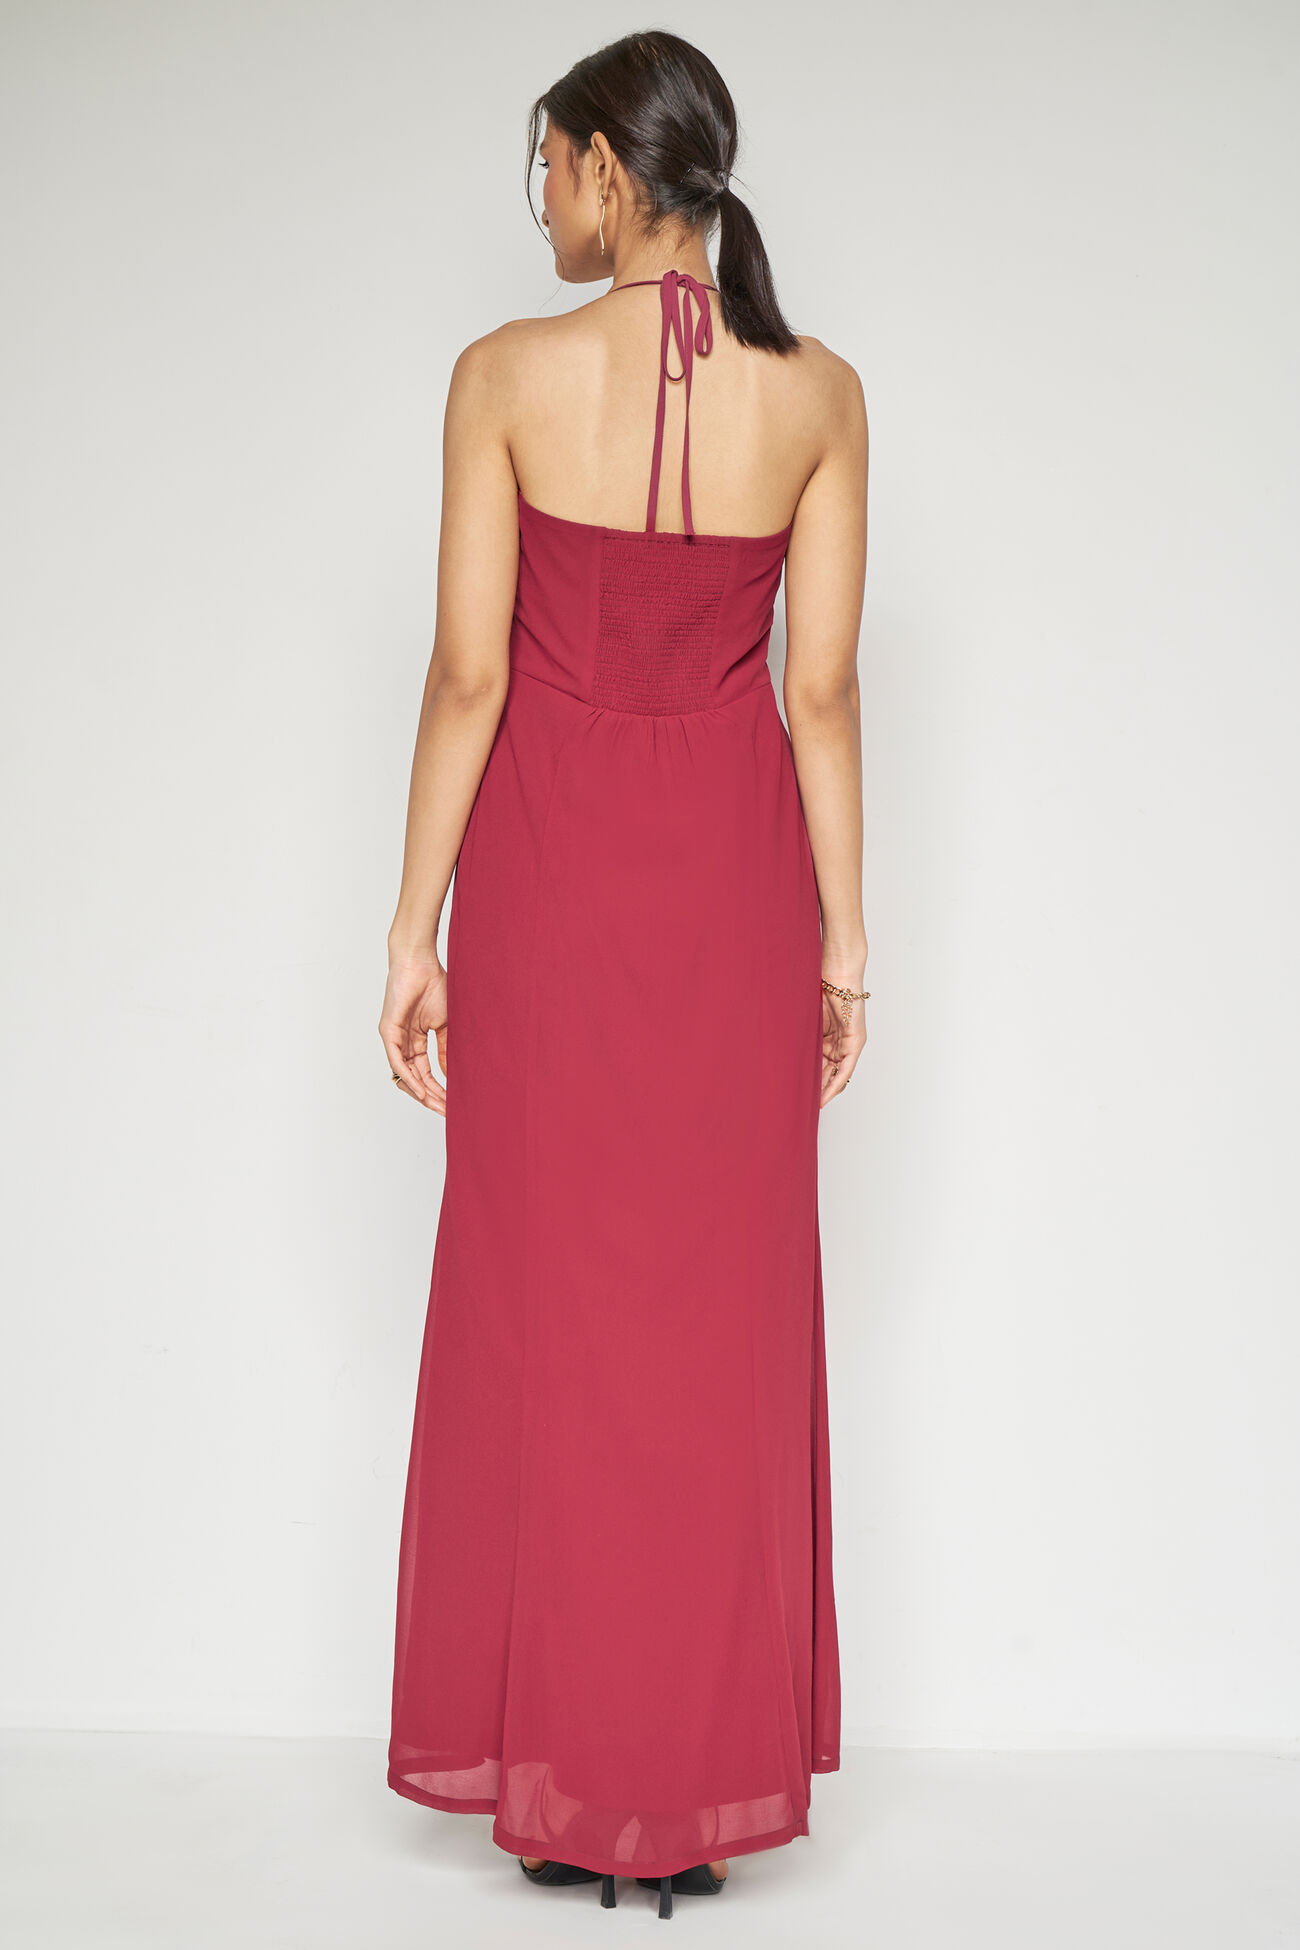 After-Hours Maxi, Maroon, image 6